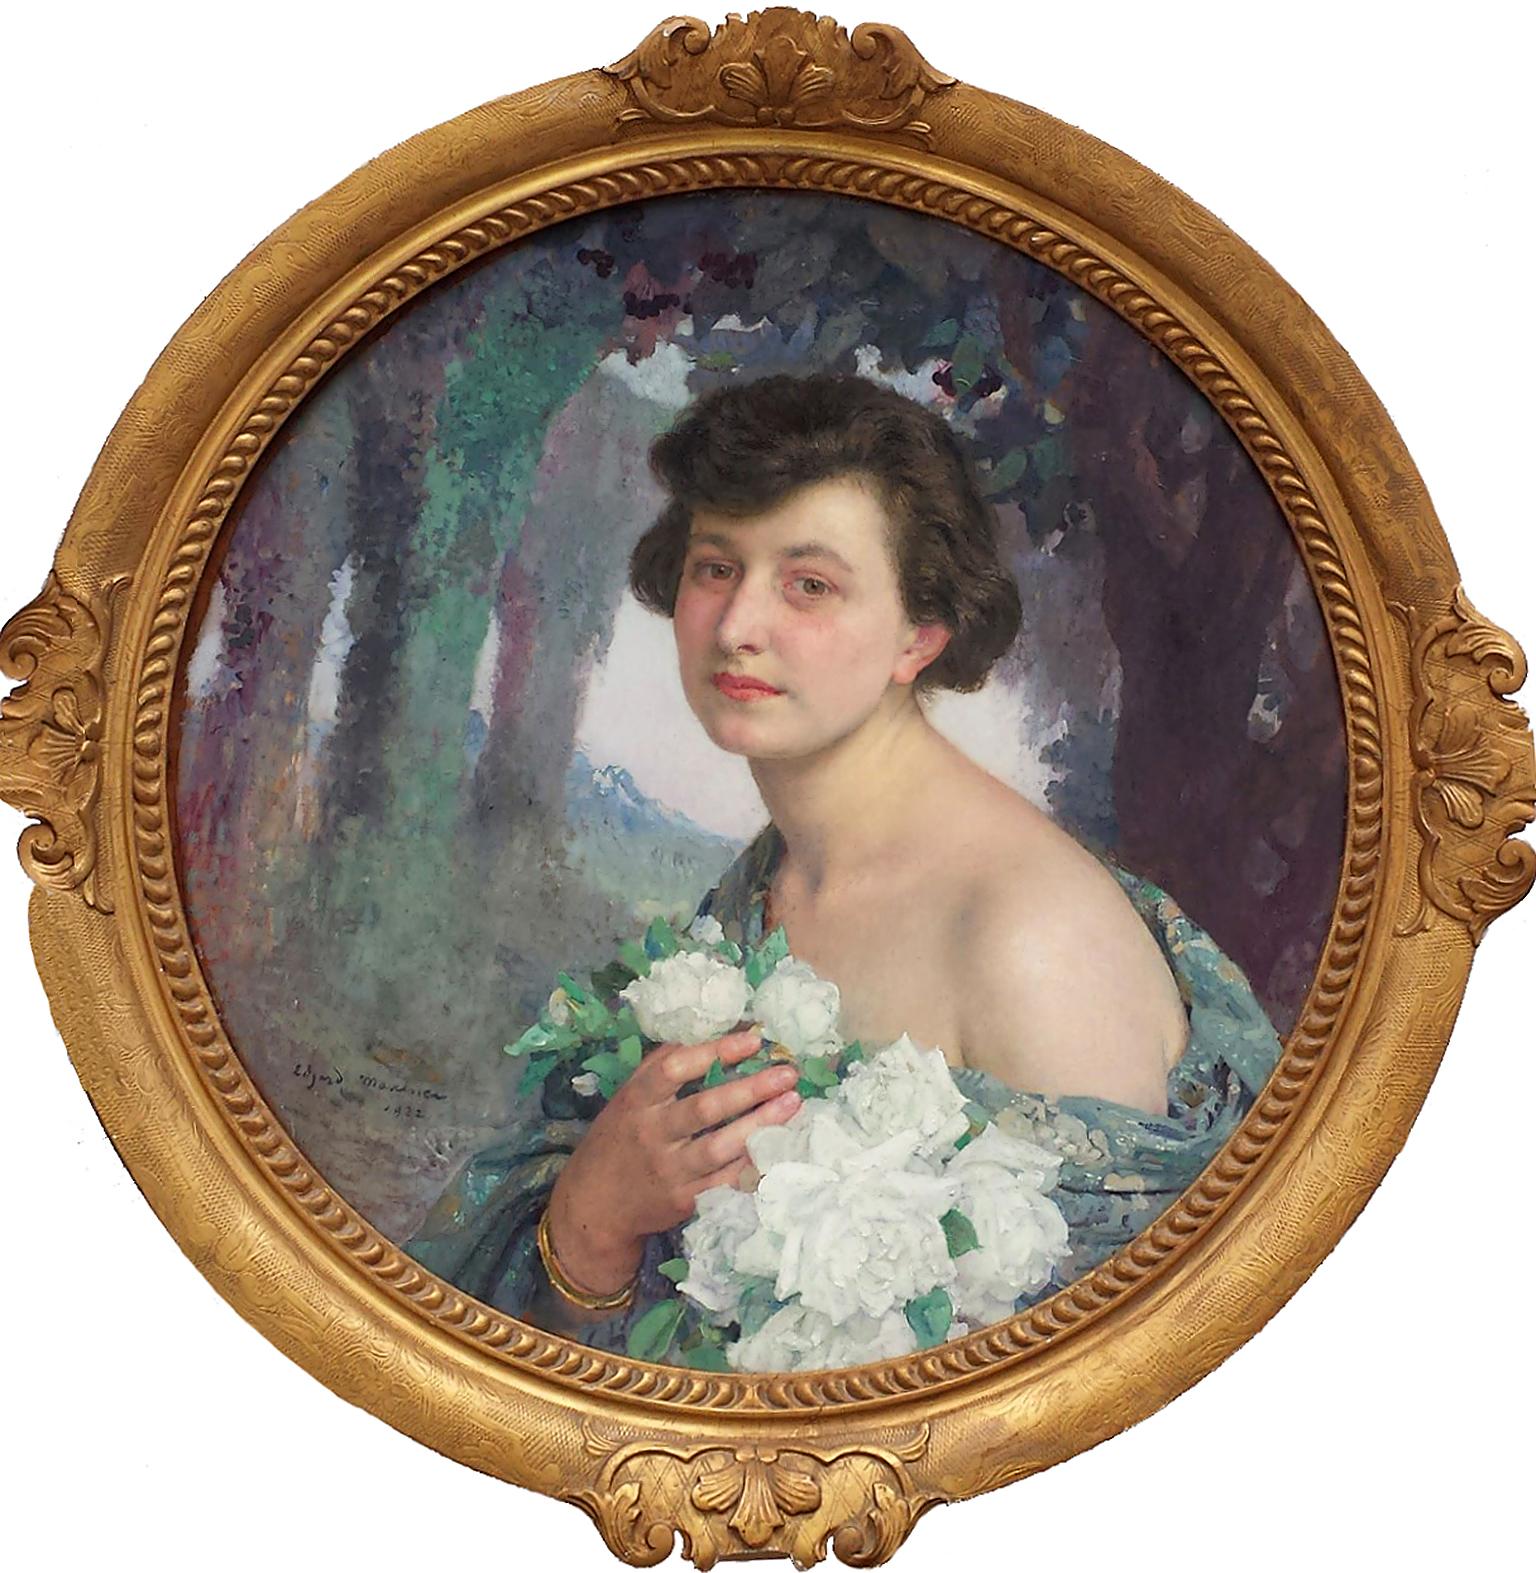 Masterfully painted portrait with rich paint surface by the famous French Symbolist Signed and dated lower left Provenance: Warehouse & Dodd, London W.J. Morrill Ltd.



